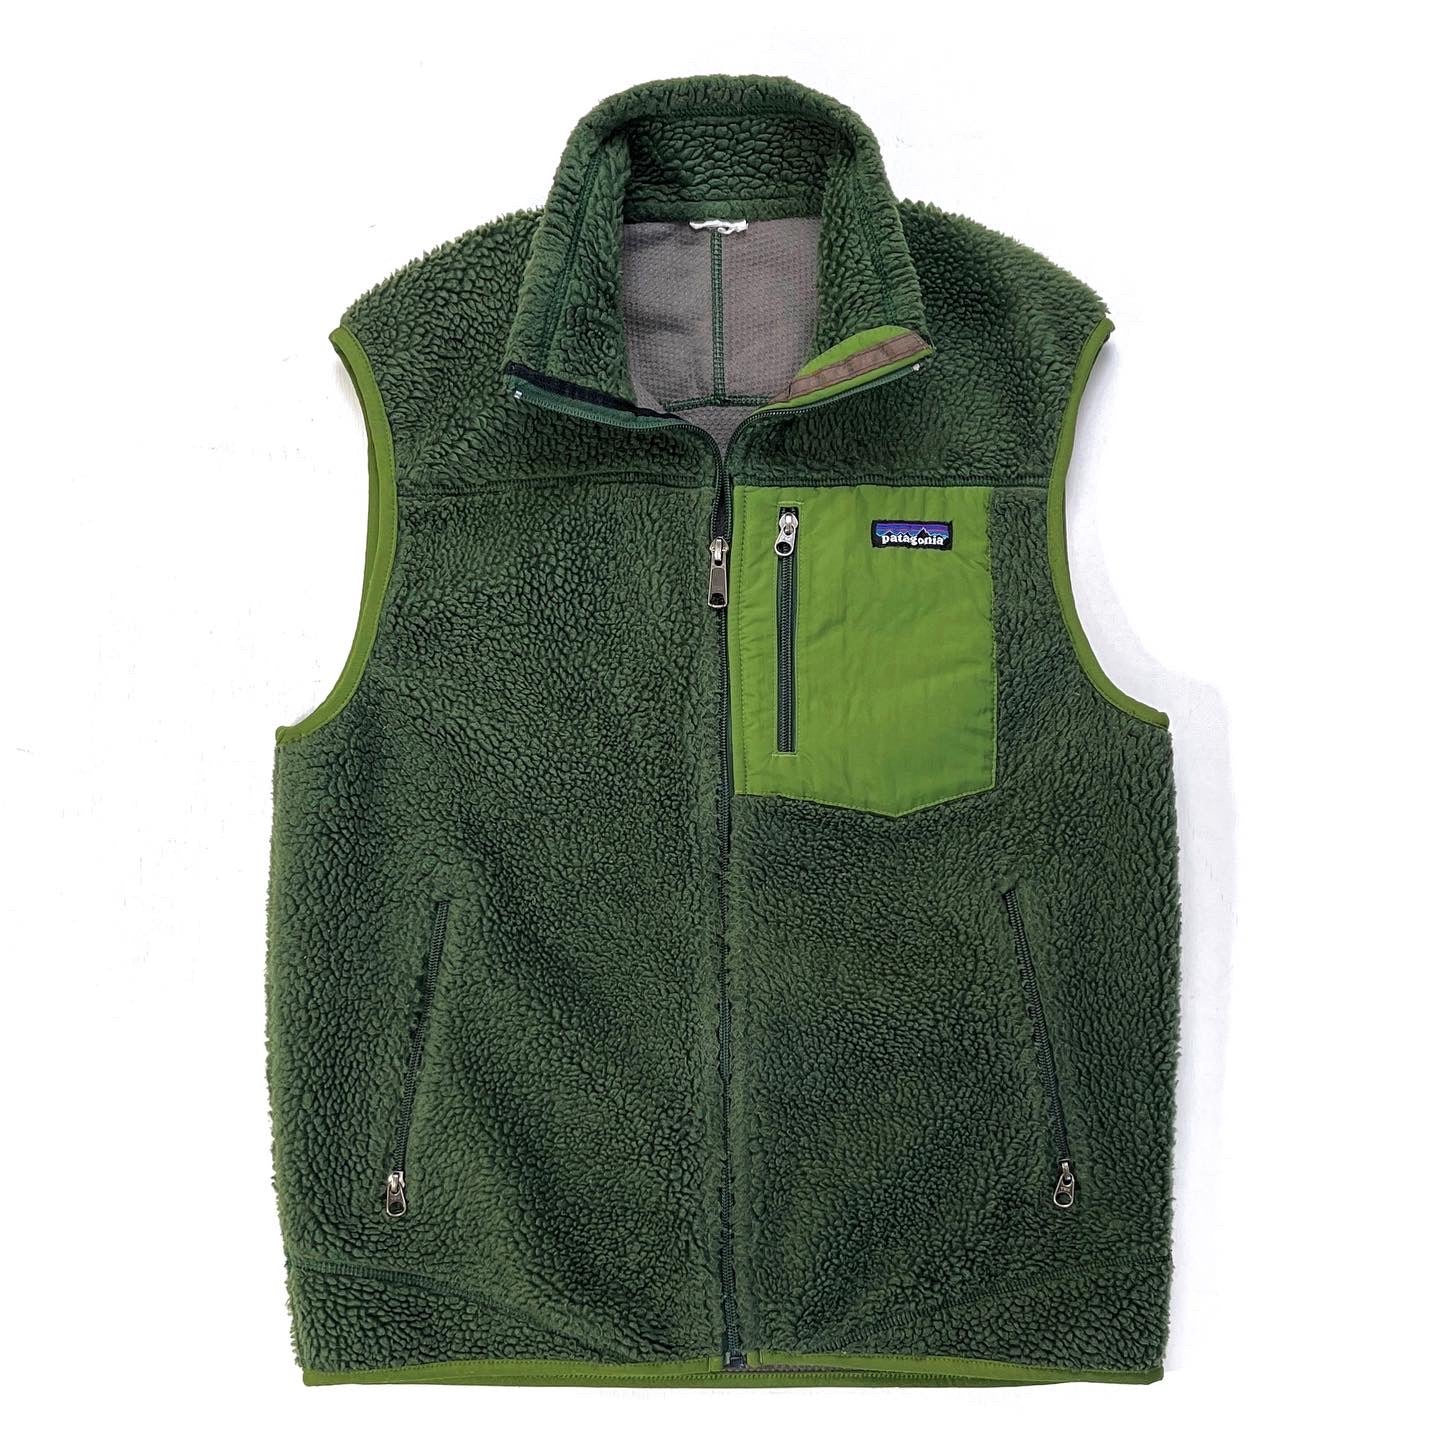 2010 Patagonia Mens Classic Retro-X Vest, Backcountry Green (S)